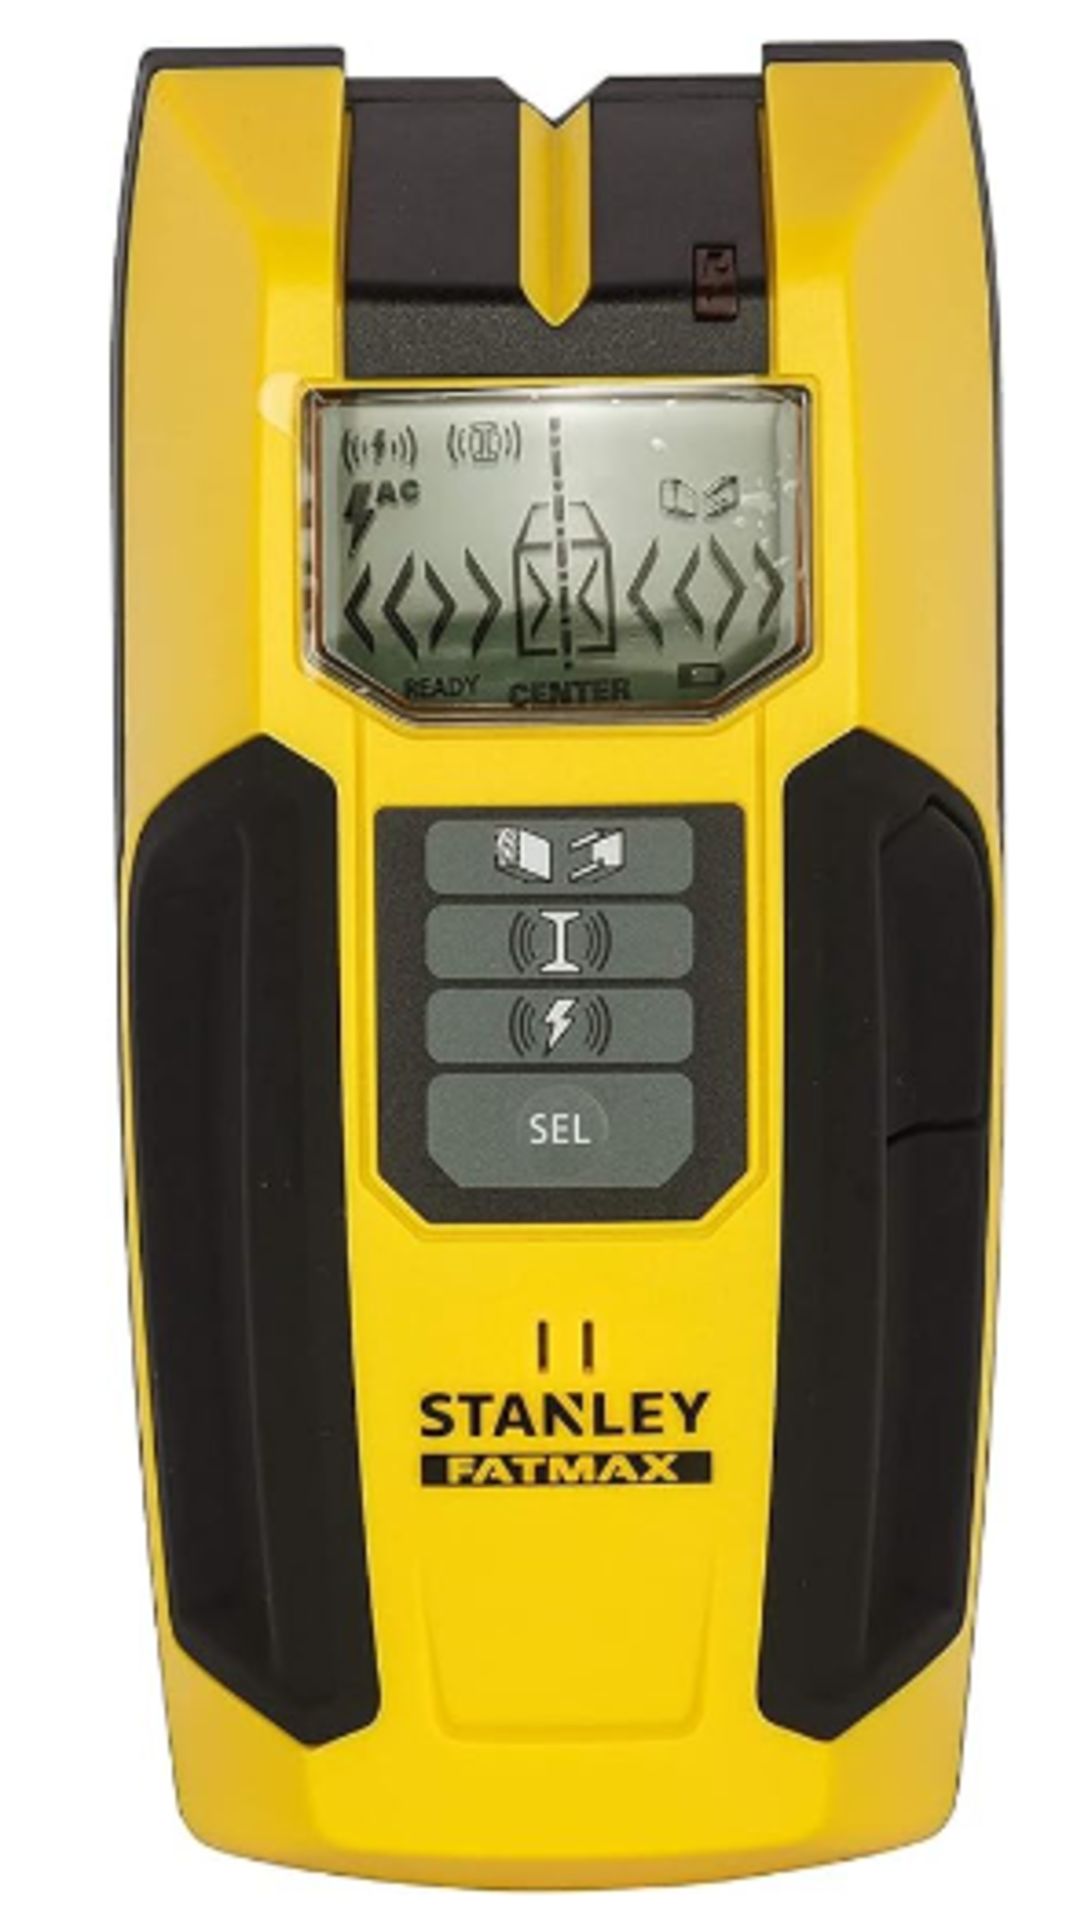 Stanley® Fatmax® Stud Finder S300 Brand New In Sealed Box RRP £45